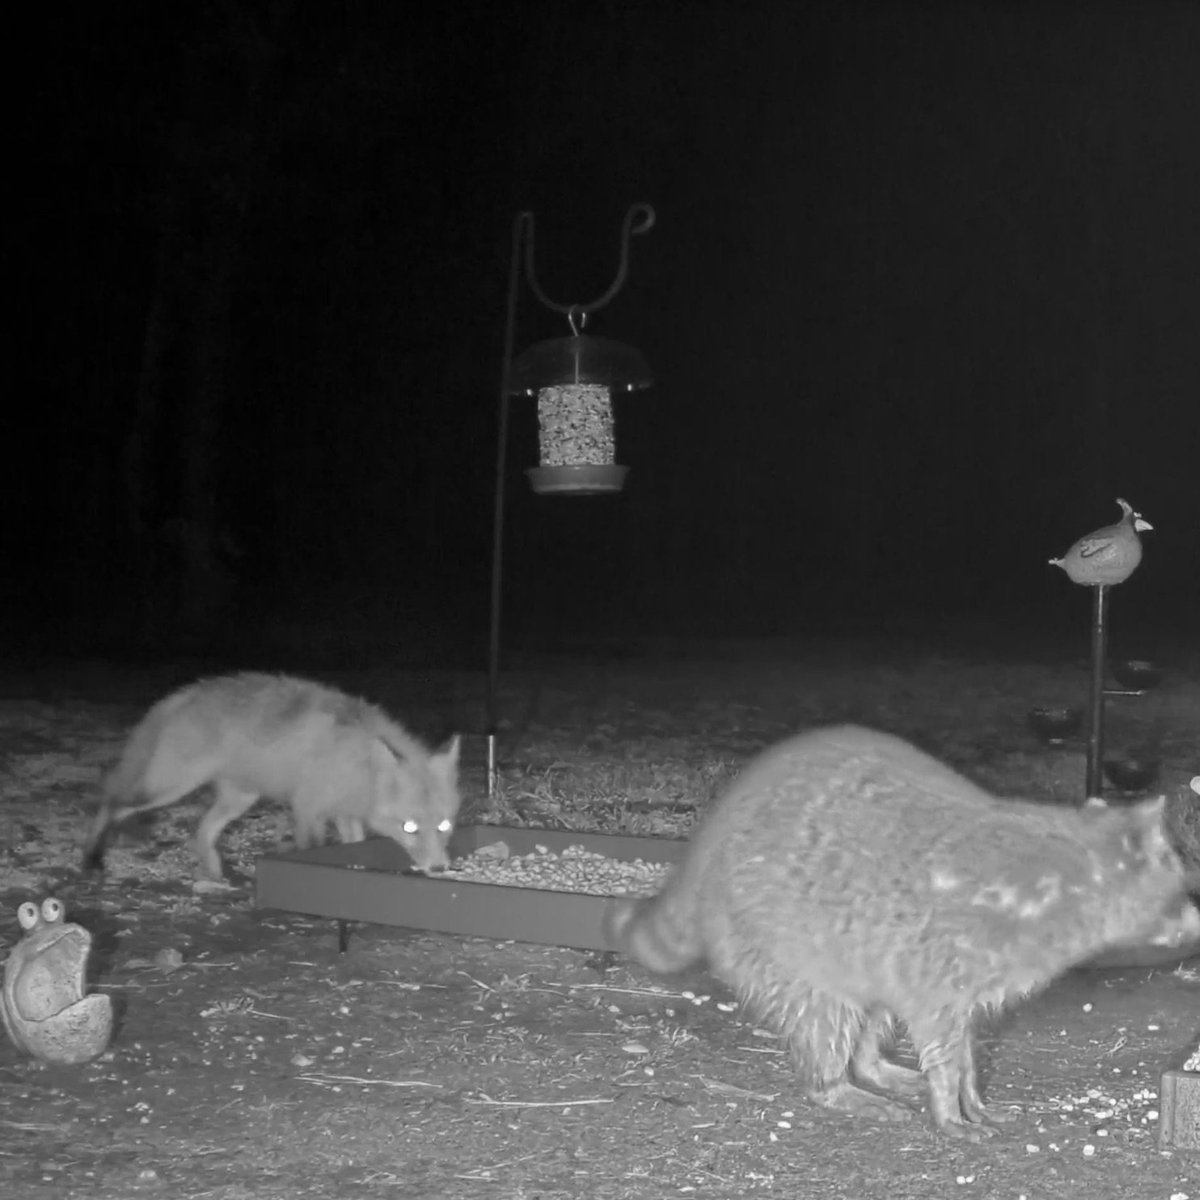 Look at the variety of night critters at CritterVision lately!  Hogs, foxes, raccoons, opossums, deer & cats! #crittervision #raccoons #opossums #deer #wildlife #wildhogs #fox